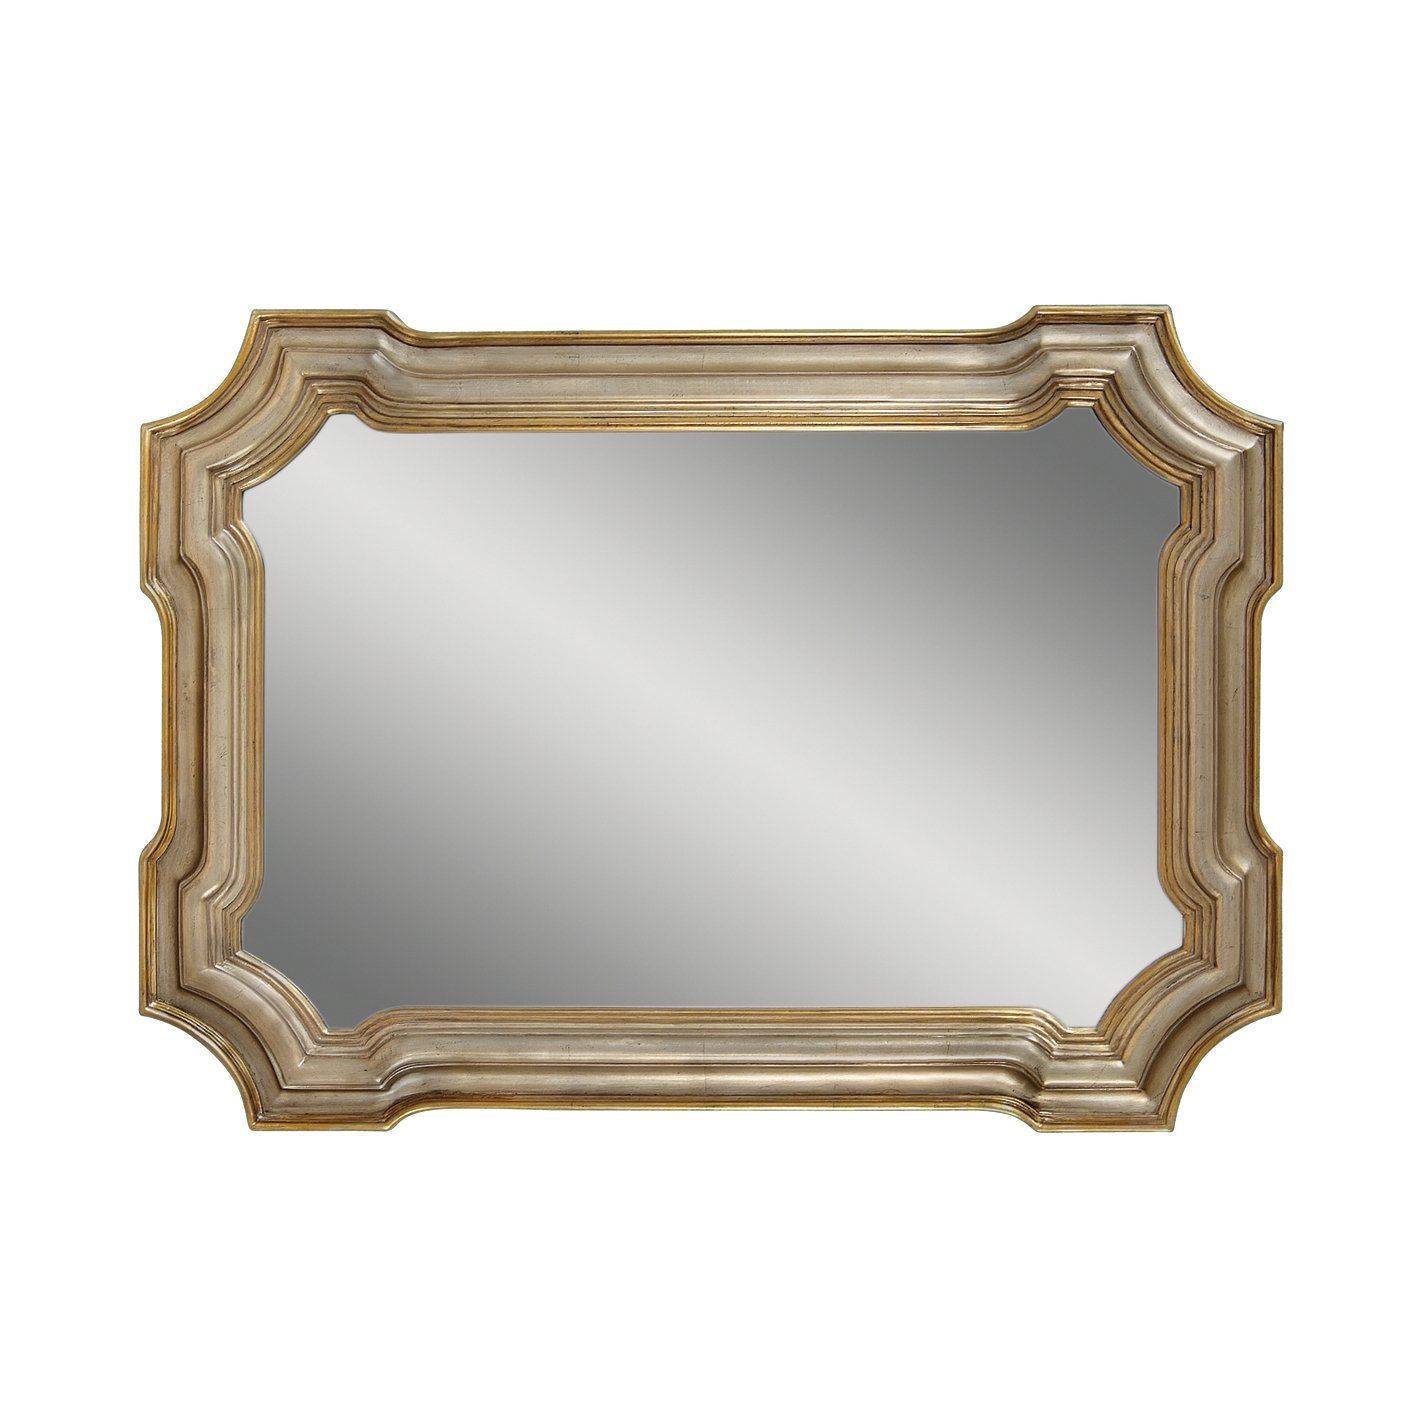 Bassett Mirror M2804 Gold Silver Leaf Shaped Rectangle Decorative In Gold Leaf Floor Mirrors (View 2 of 15)